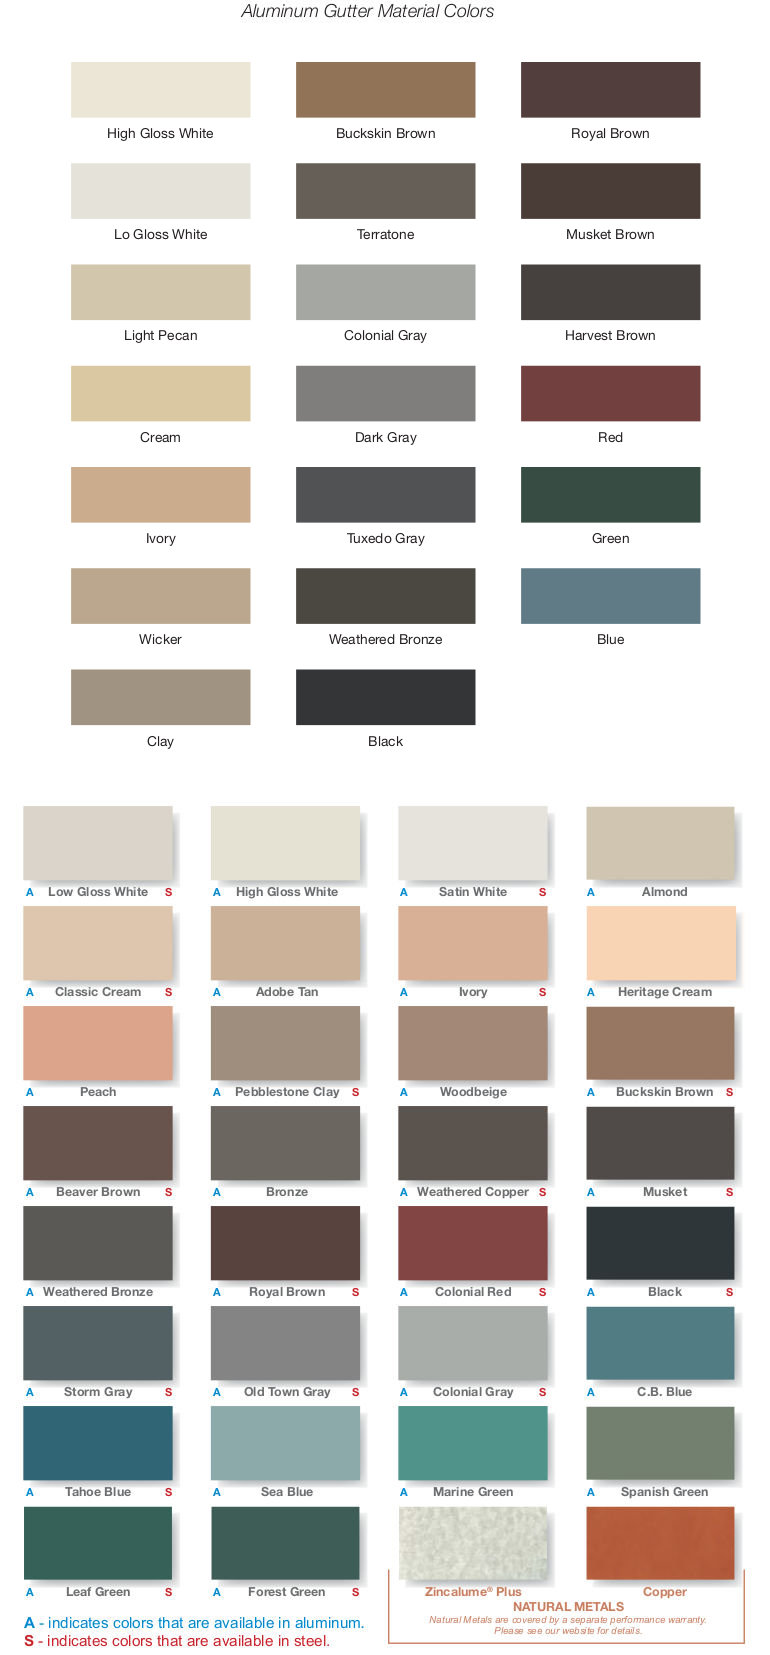 All City Seamless offers a wide variety of gutter colors.